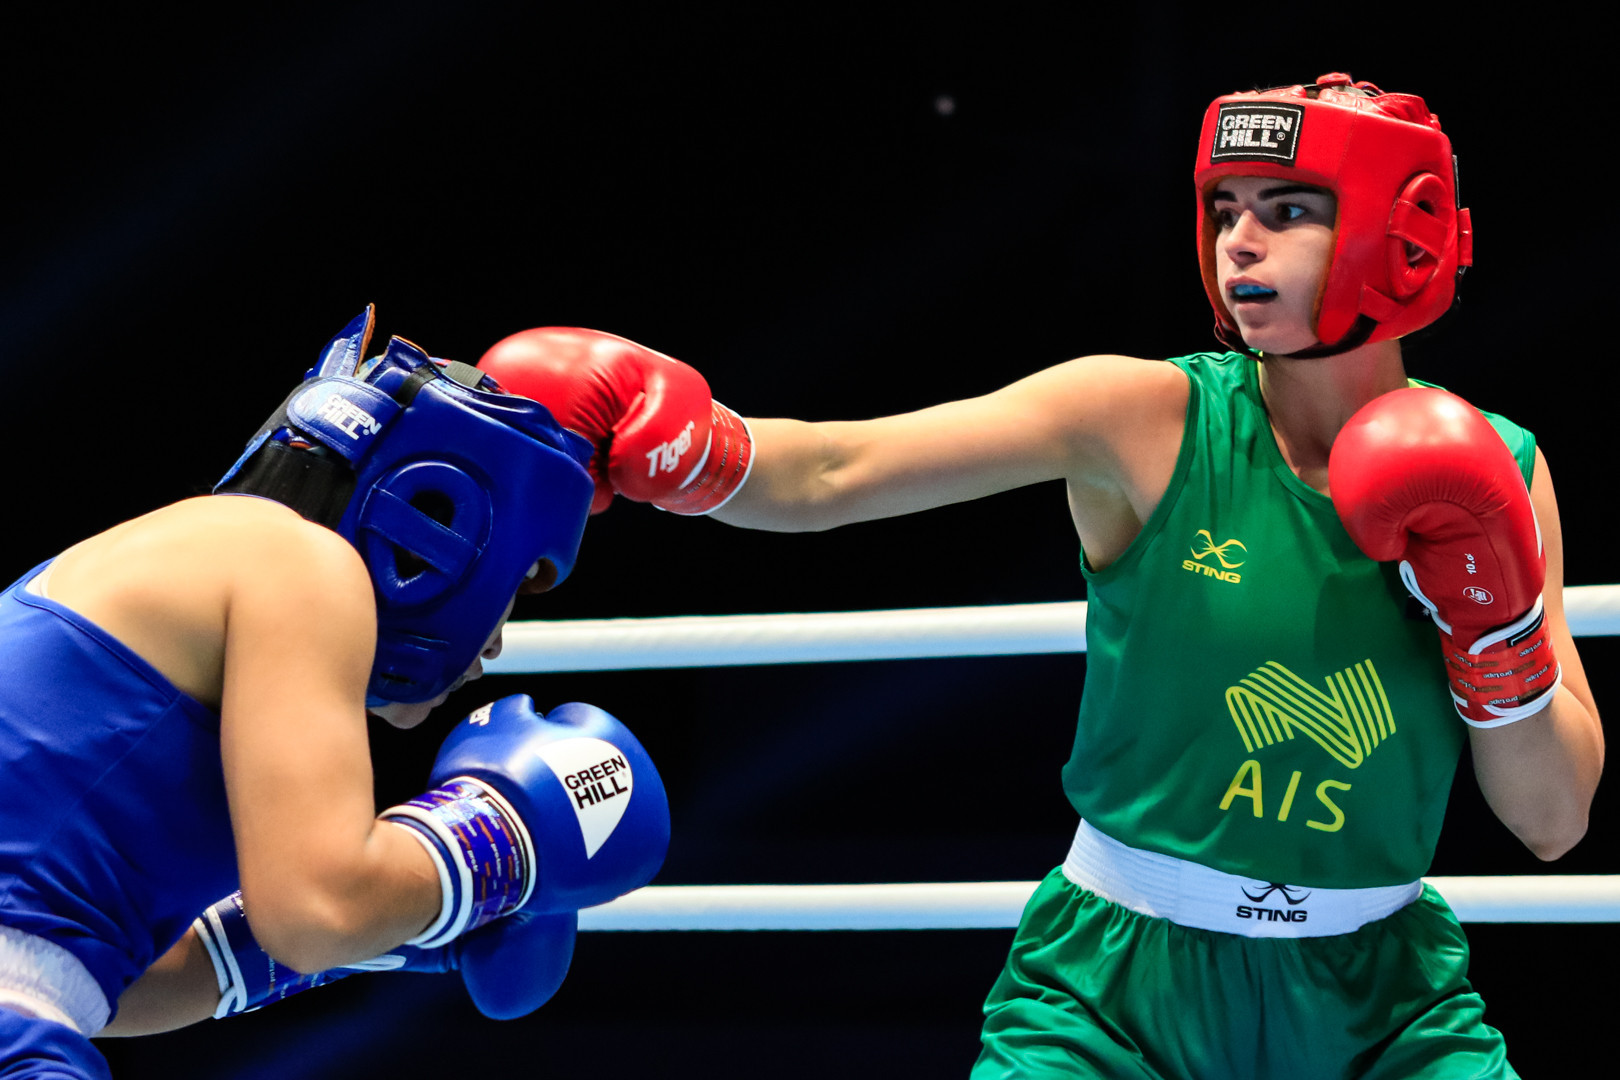 Commonwealth featherweight champion Nicolson triumphs in opening bout of AIBA Women's World Championships